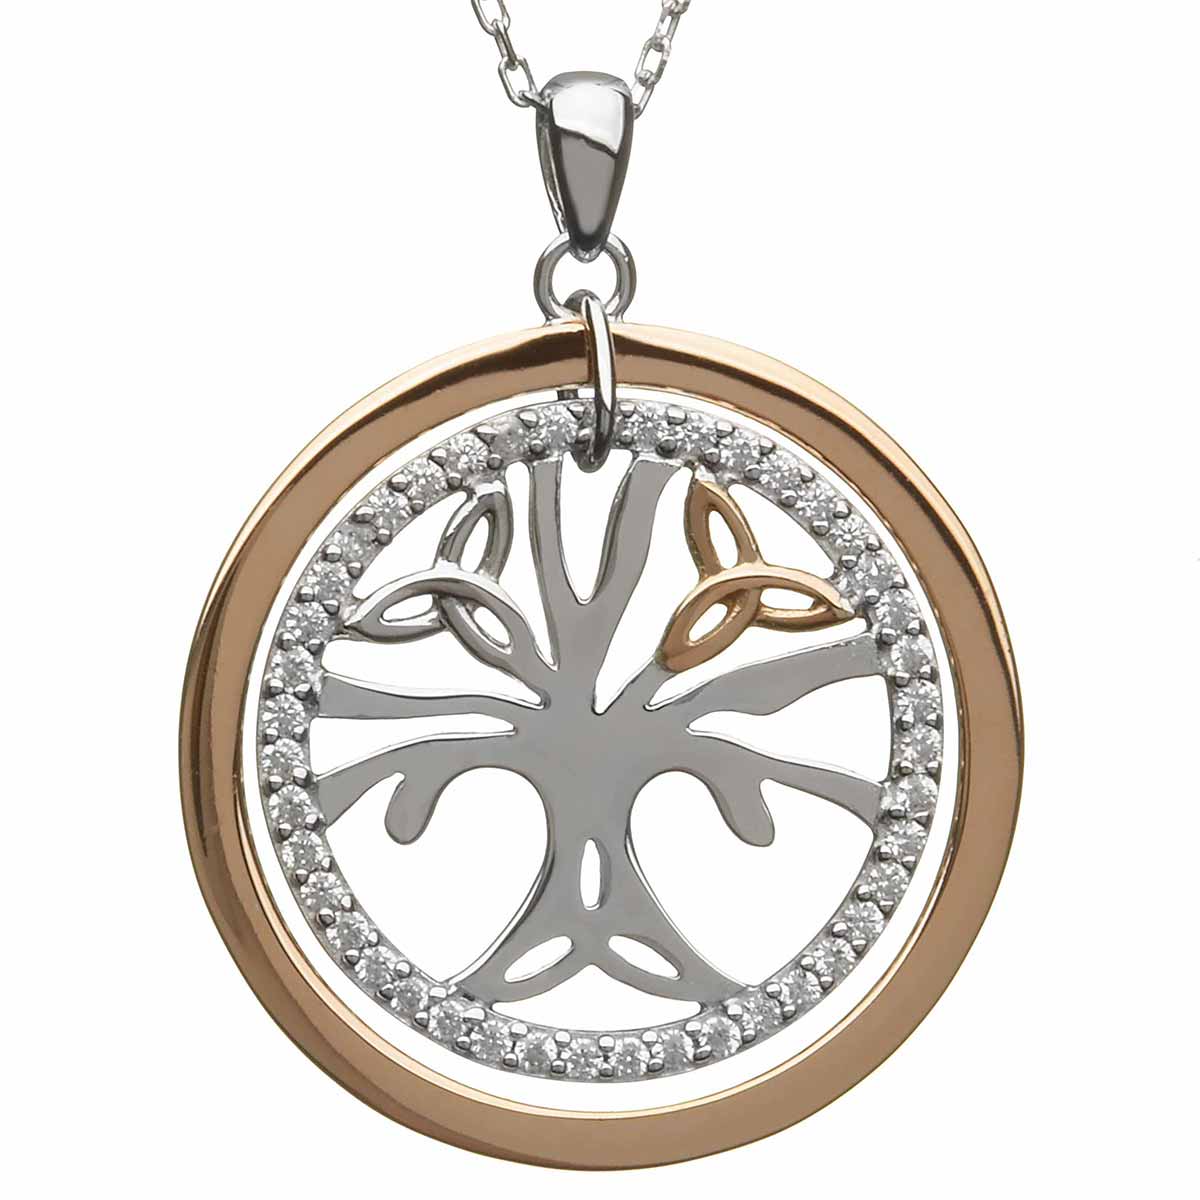 Product image for Irish Necklace | Real Irish Gold & Sterling Silver Celtic Tree of Life Pendant by House of Lor